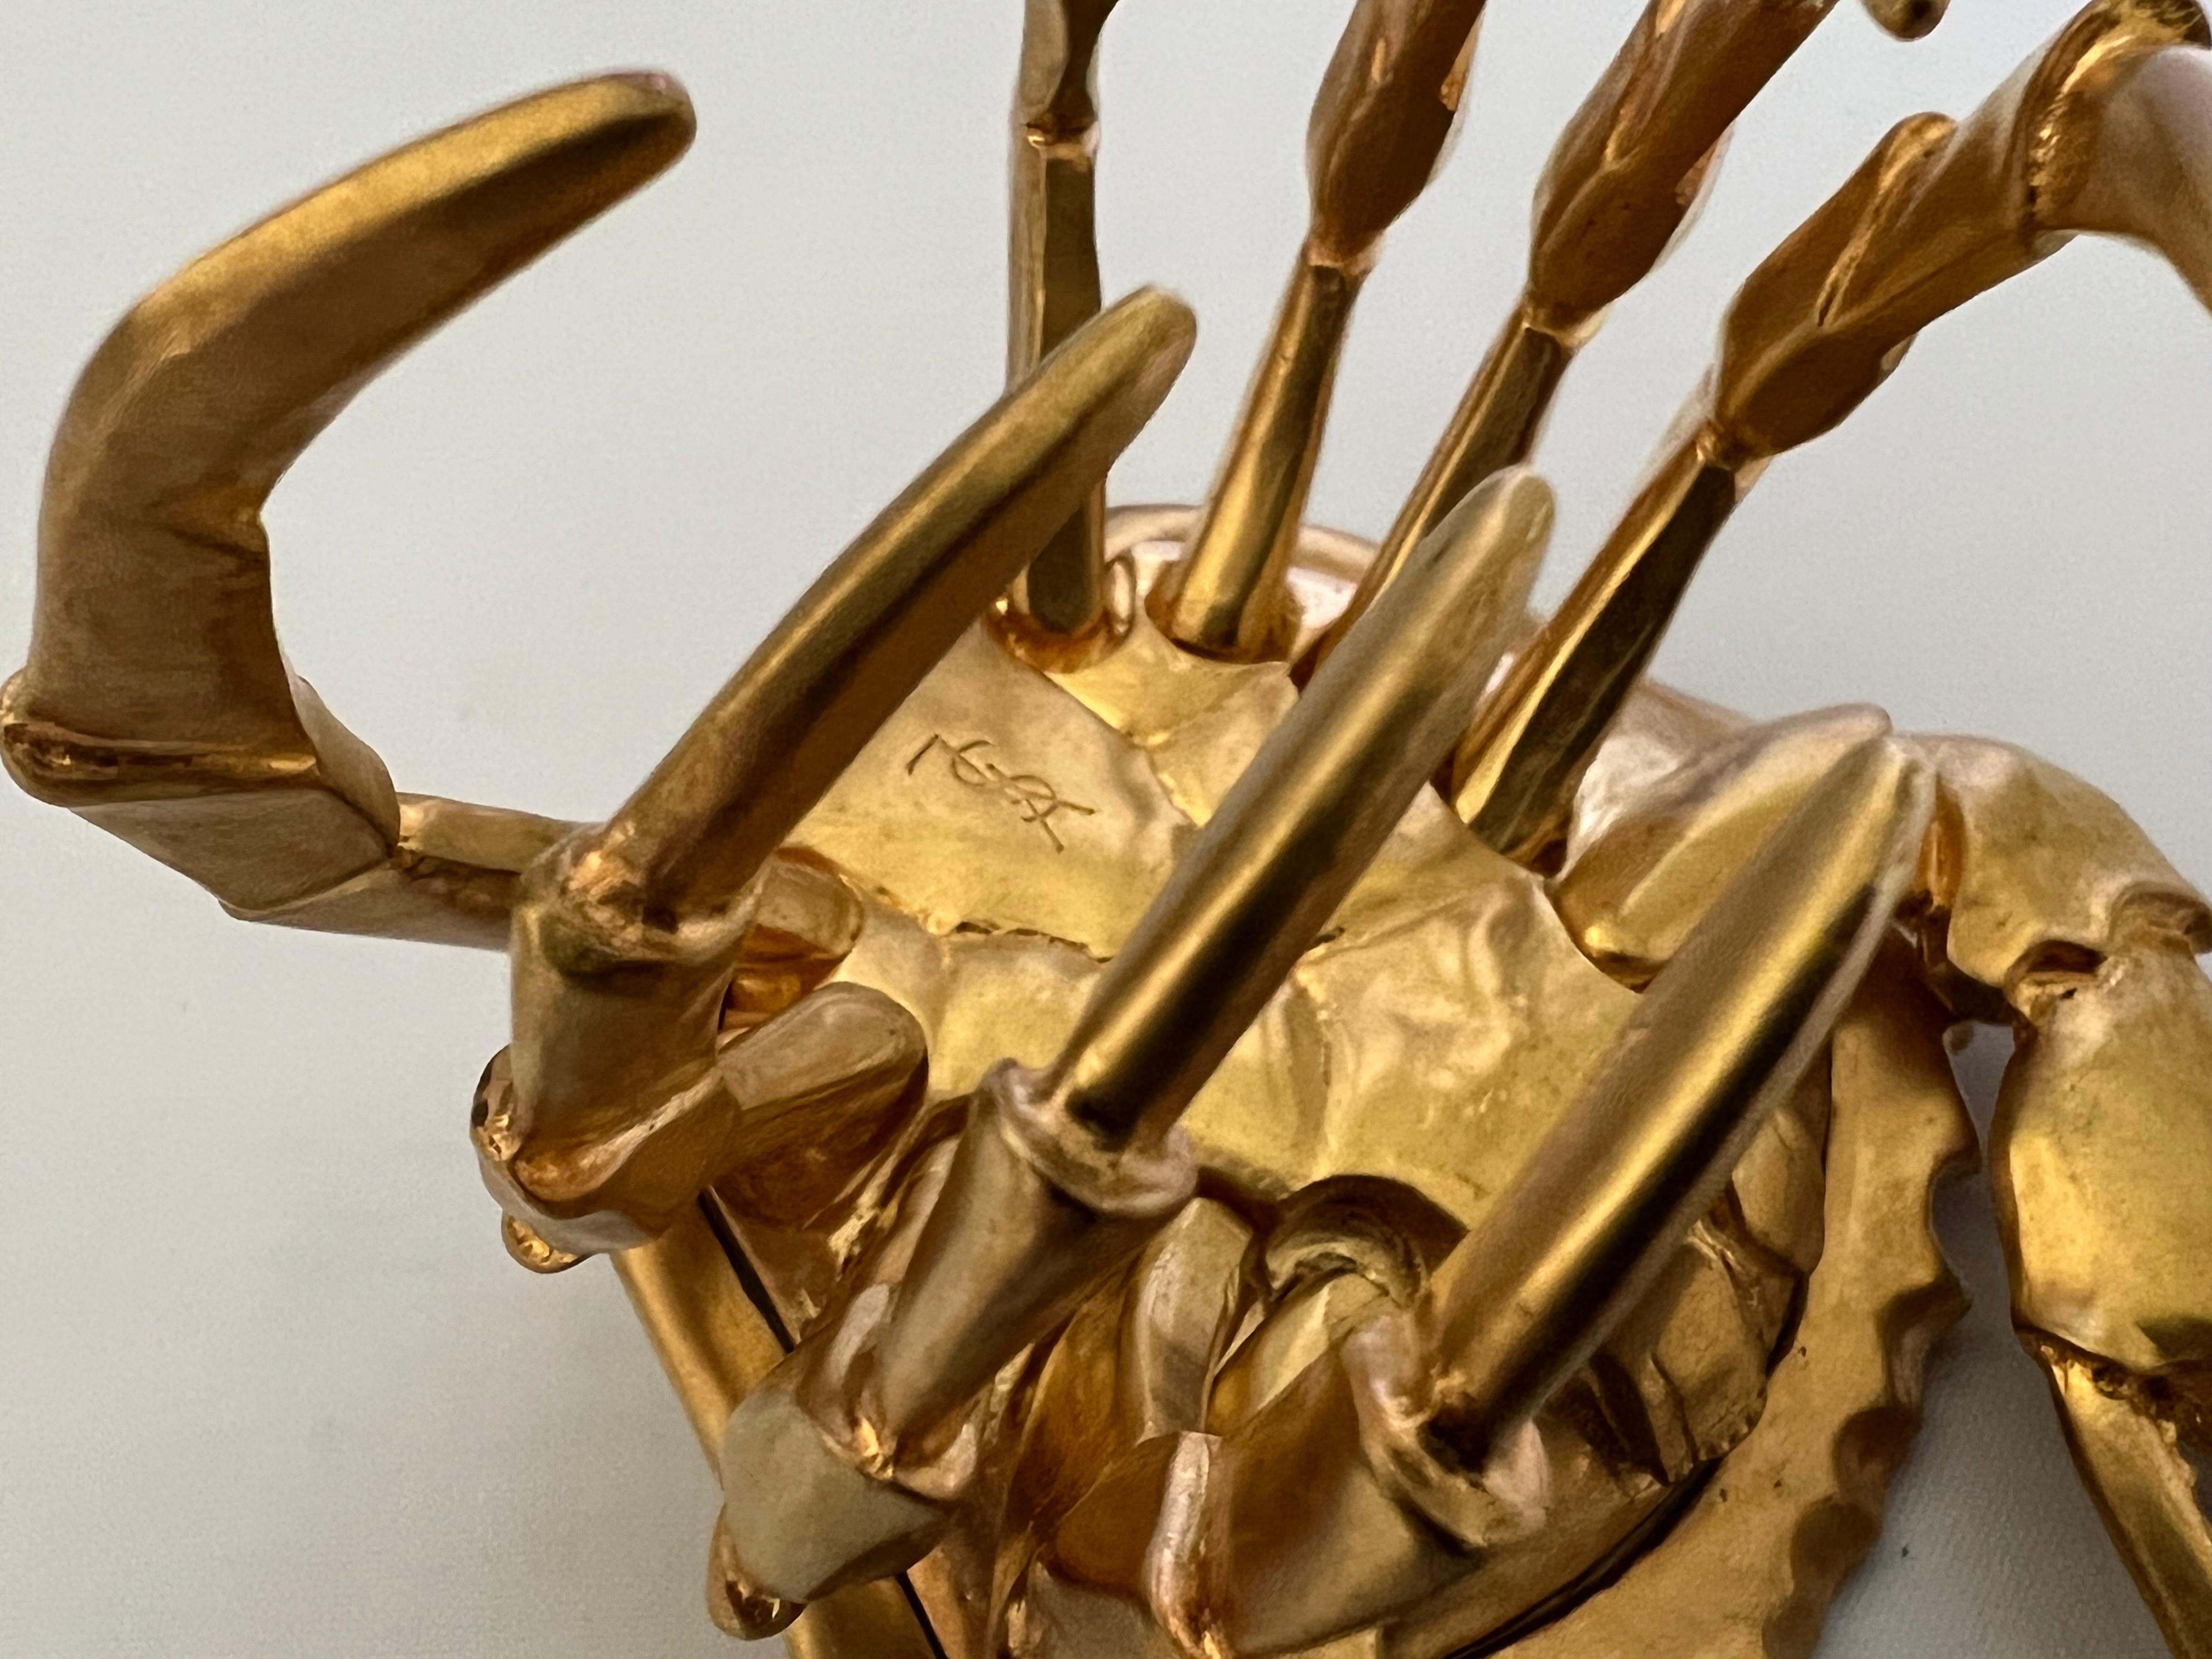 Scarce Yves Saint Laurent gilt metal articulated crab cuff bracelet. Signed Yves Saint Laurent, made in France.